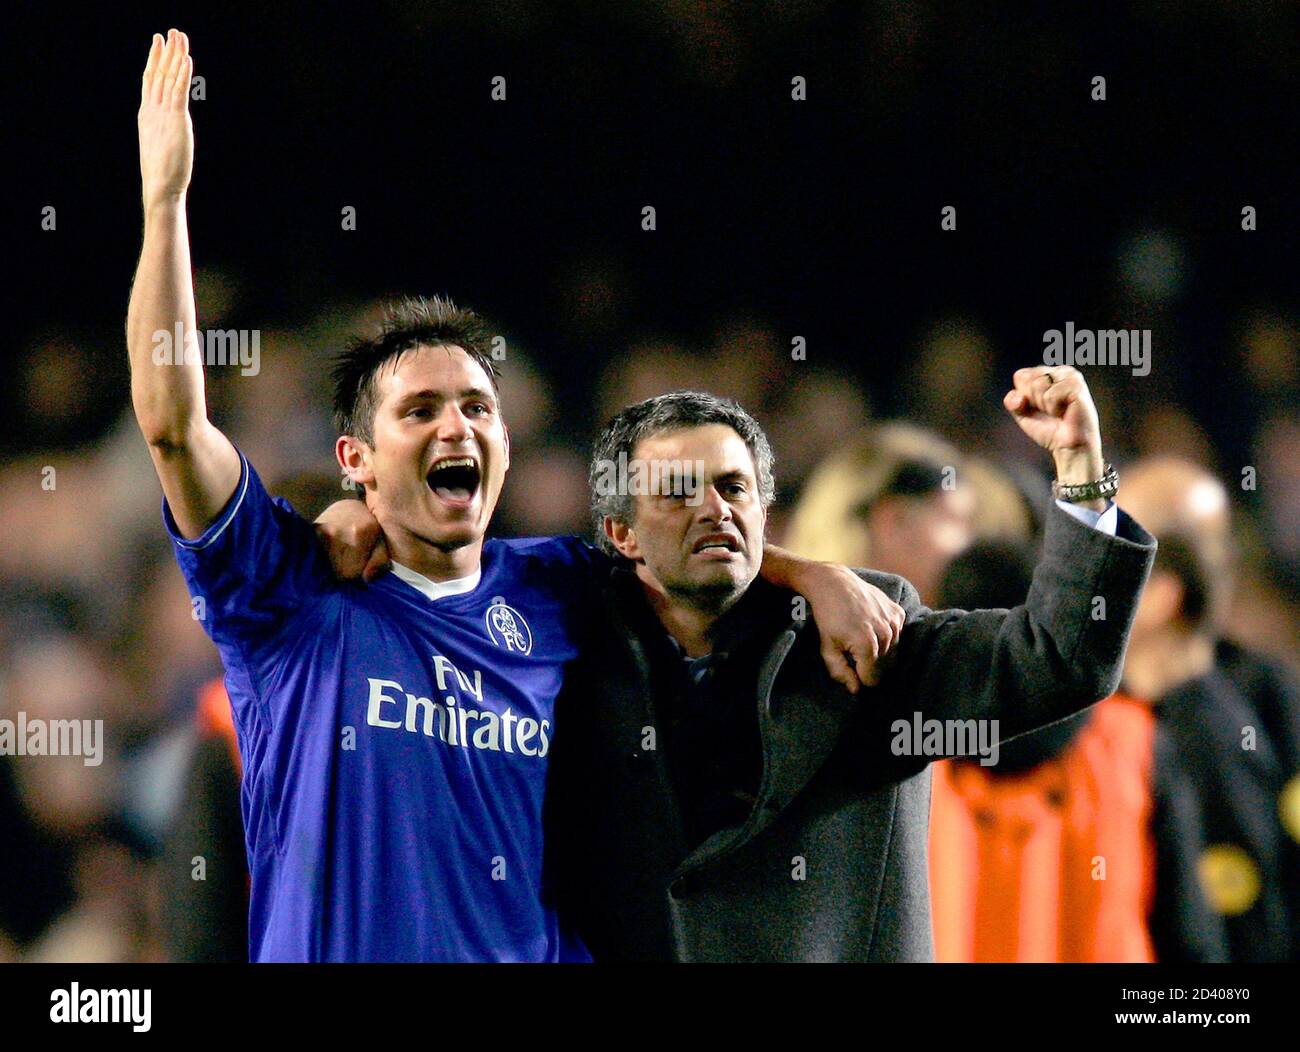 Chelsea S Manager Jose Mourinho R Celebrates With Frank Lampard As The Final Whistle Is Blown Following His Team S Victory During Their Champions League First Knock Out Round Second Leg Match Against Barcelona At